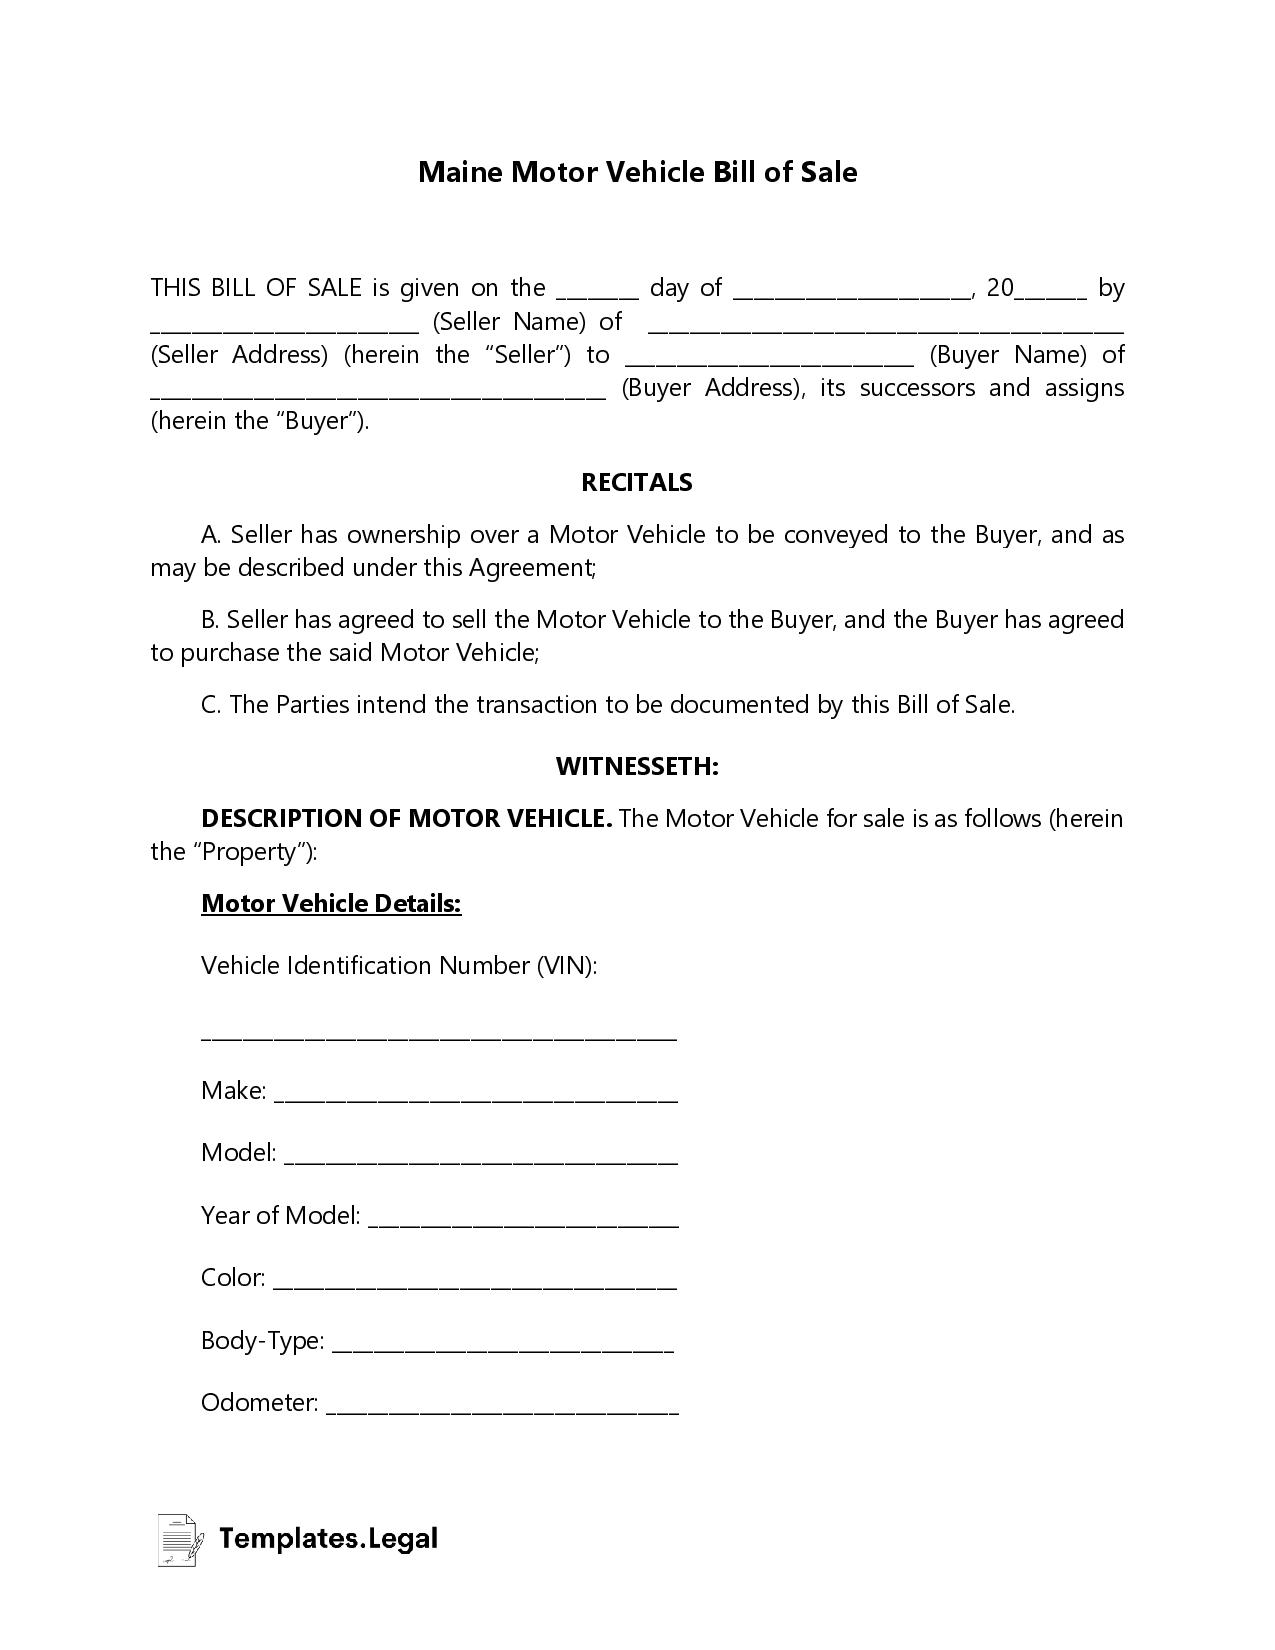 Maine Motor Vehicle Bill of Sale - Templates.Legal